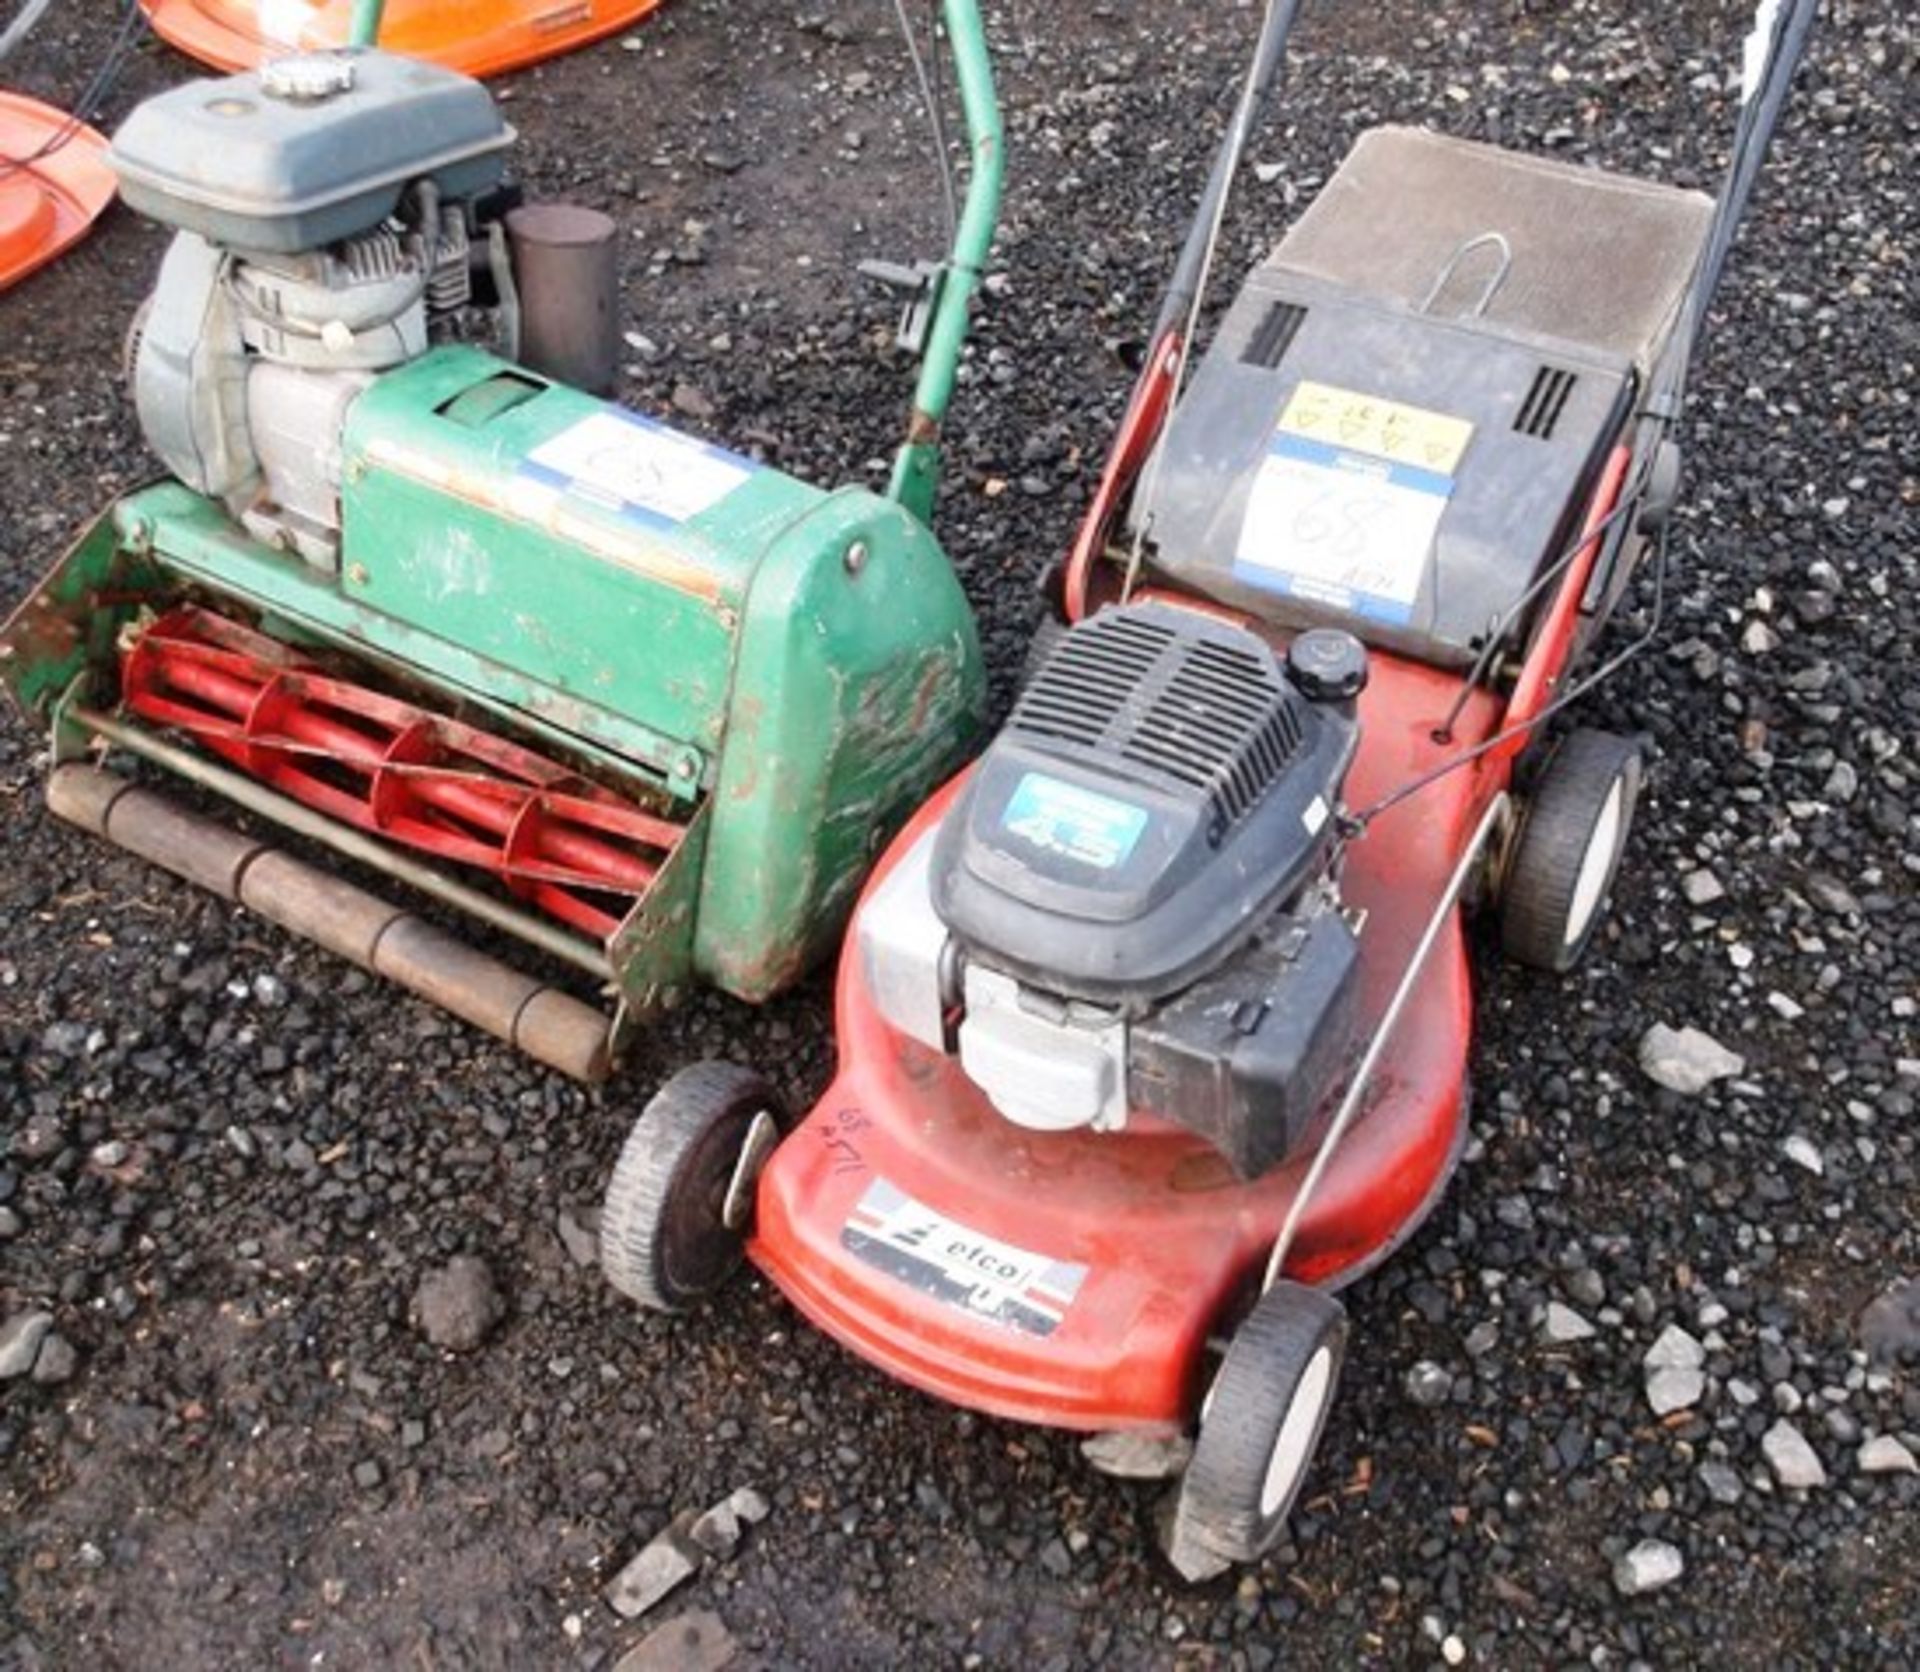 1 X RANSOMES MARQUIS 61 CYLINDER MOWER & 1 X EFCO ROTARY MOWER**DIRECT FROM HISTORIC SCOTLAND** - Image 2 of 3